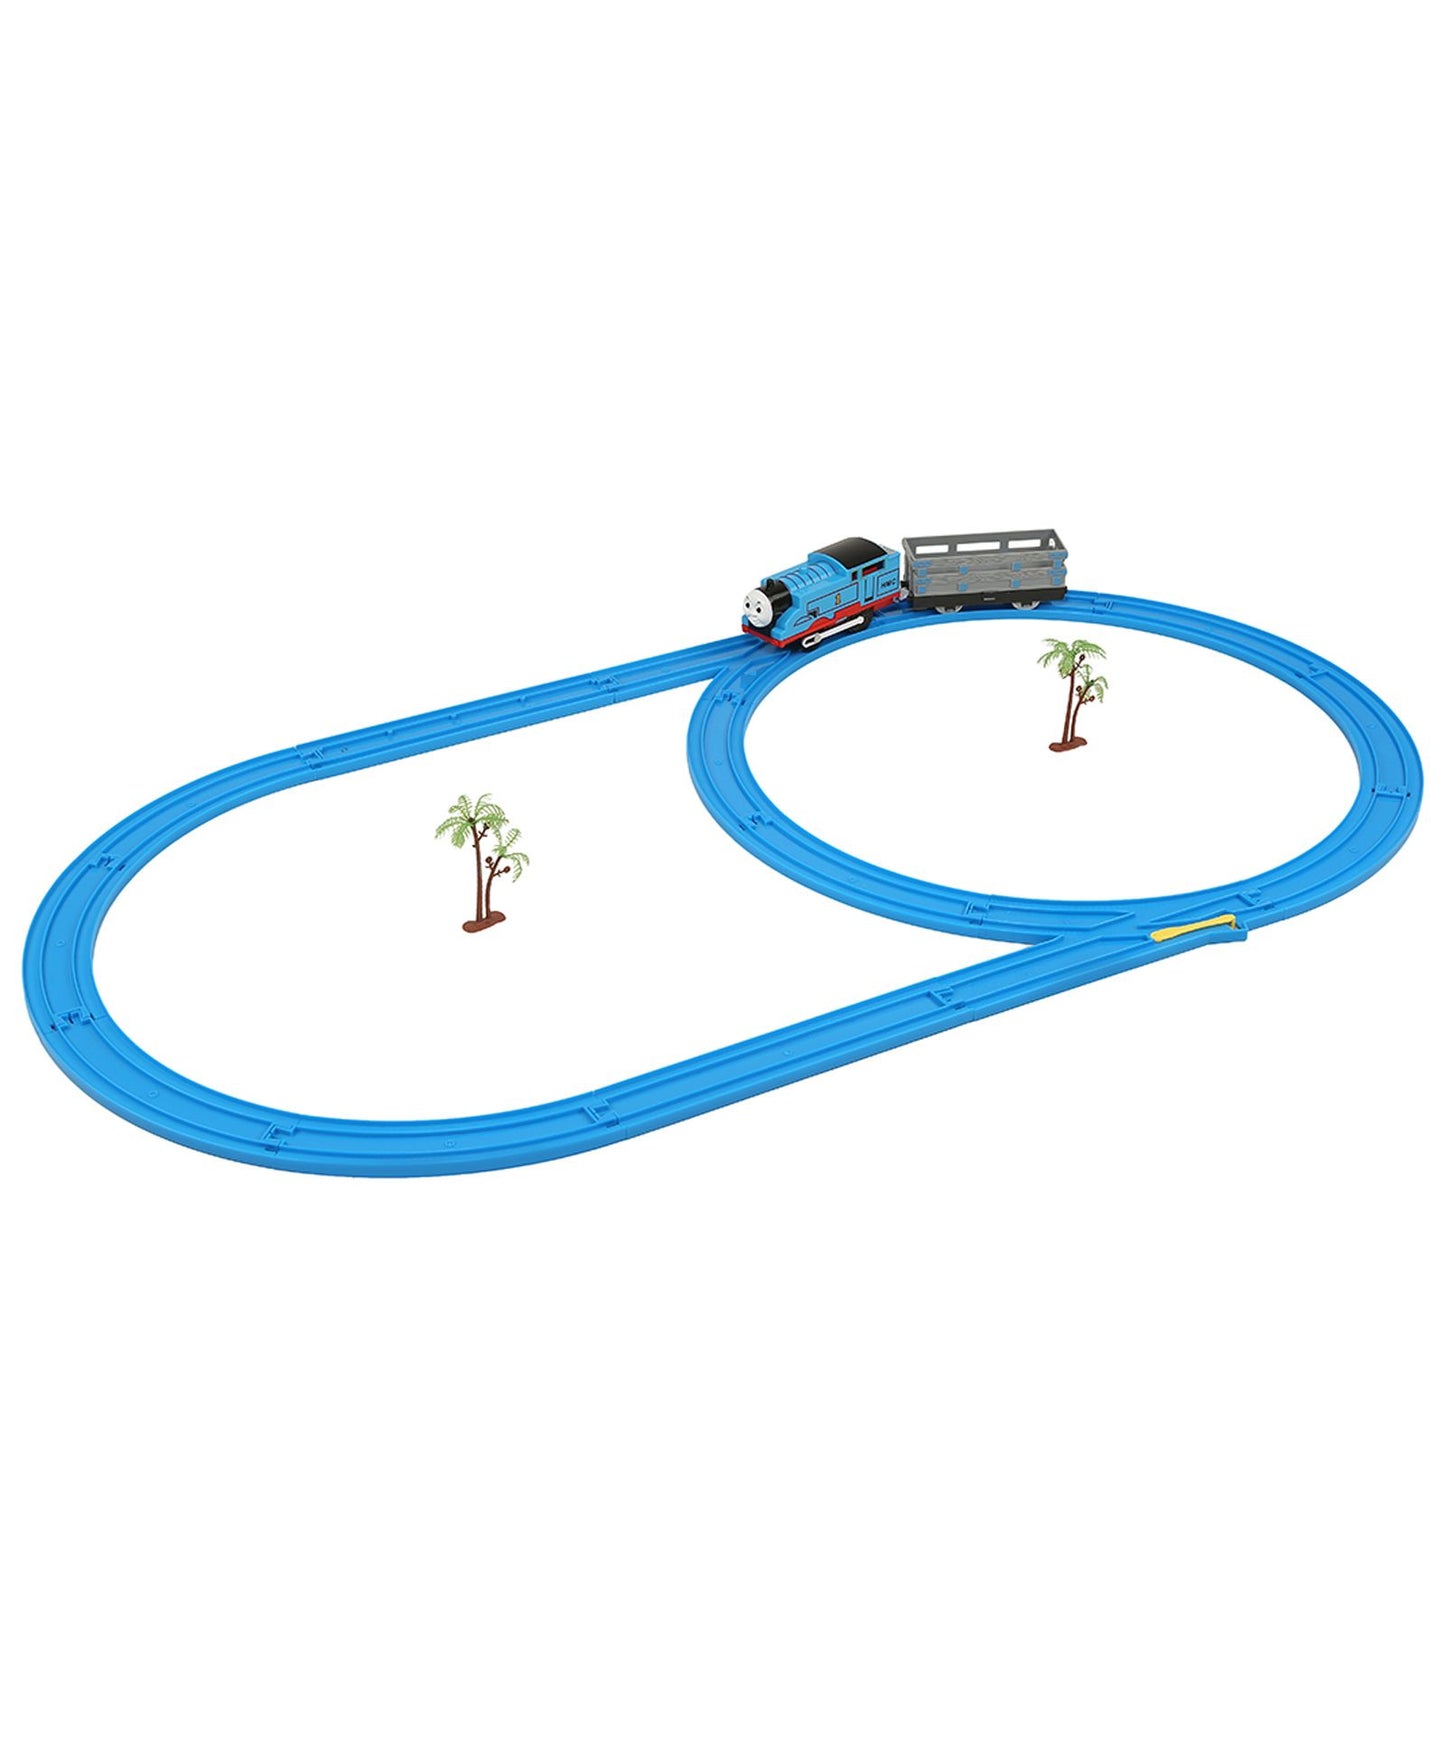 Train & Friends Battery Operated Train Track Toy Set  (Multicolor)